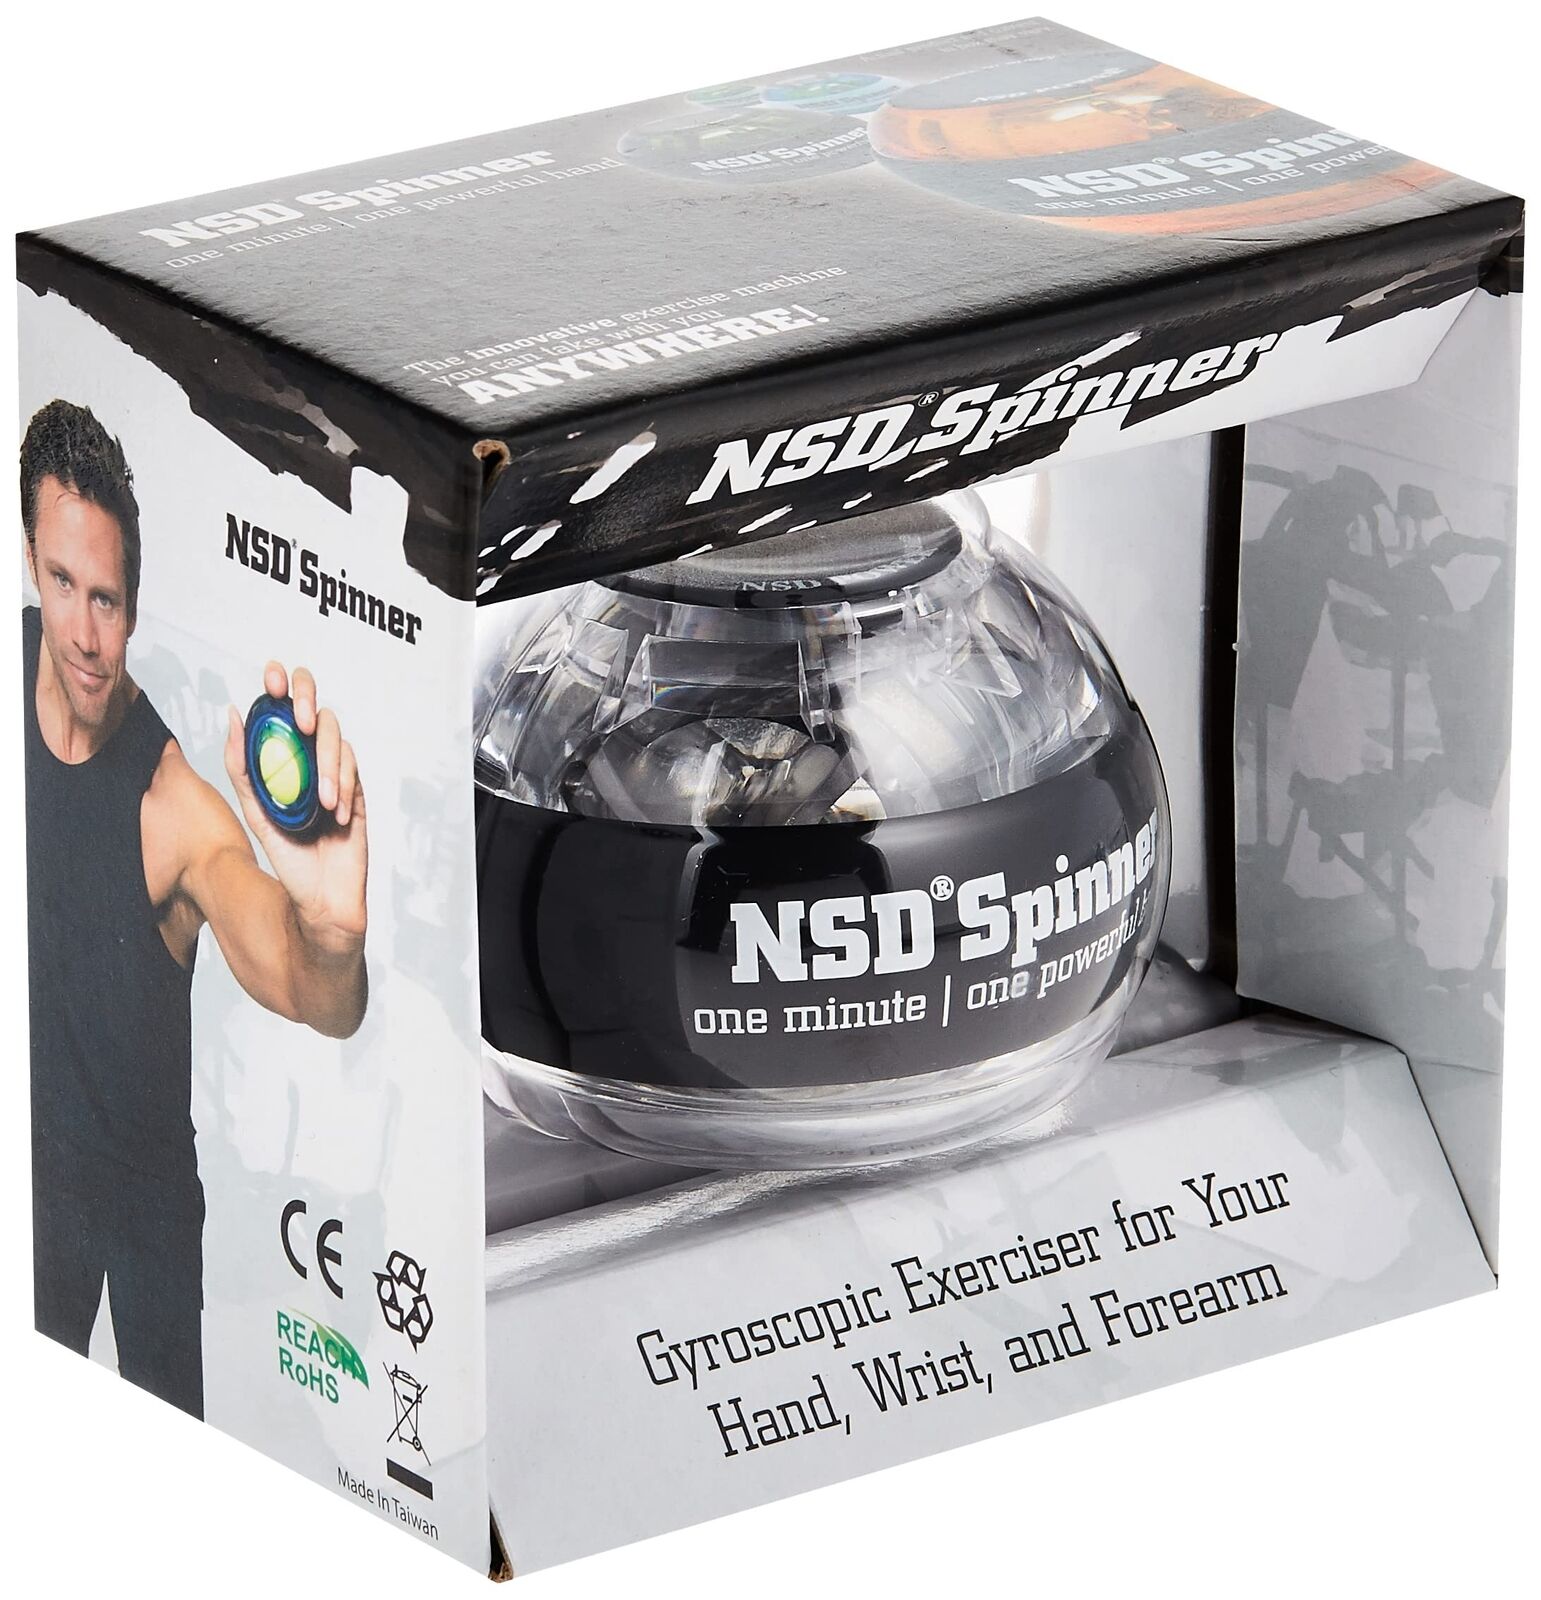 NSD+Power+Essential+Spinner+Gyroscopic+Wrist+and+Forearm+Exerciser